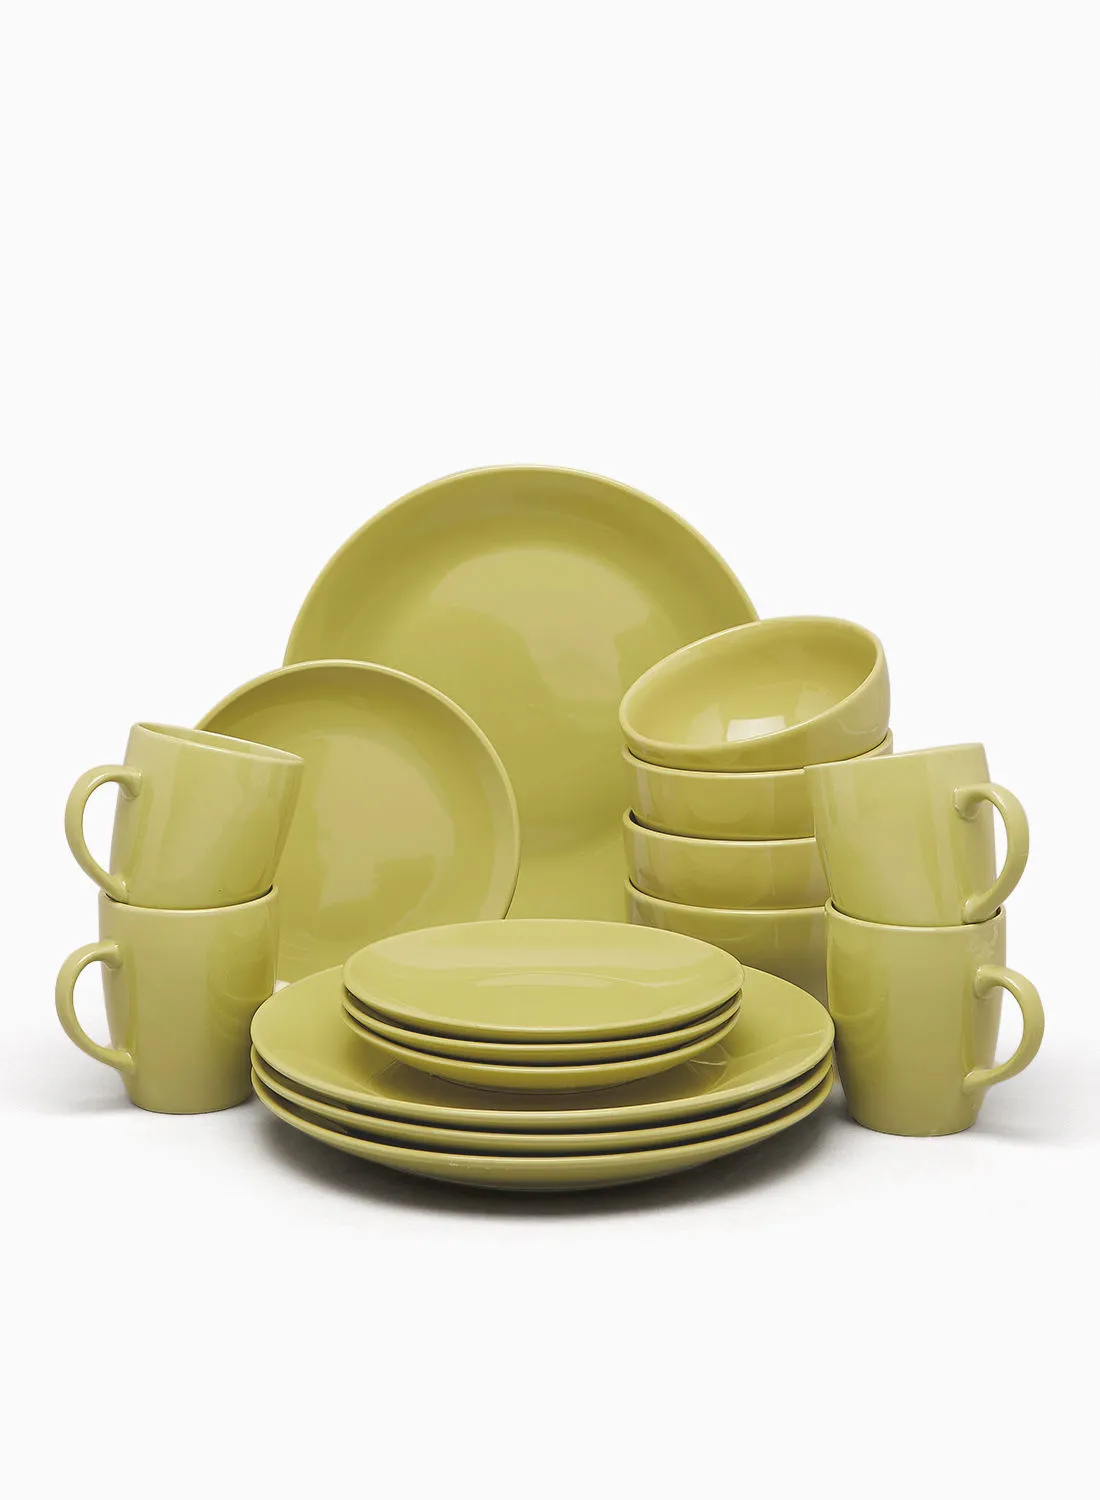 noon east 16 Piece Stoneware Dinner Set - Dishes, Plates - Dinner Plate, Side Plate, Bowl, Mugs - Serves 4 - Green